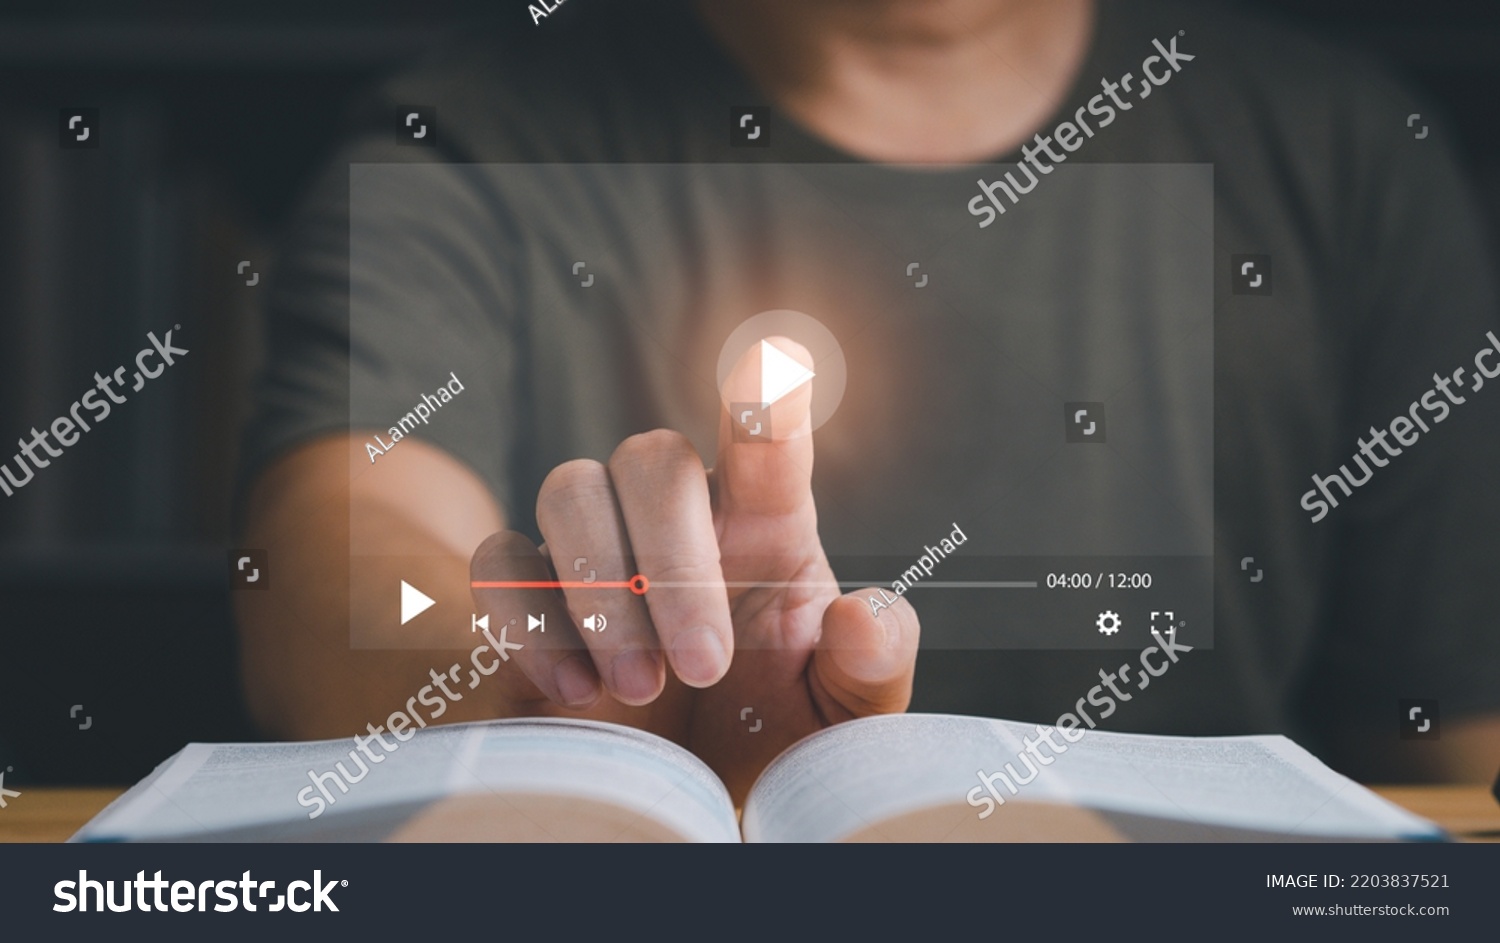 Businessman or student playing the video for learning new technology or music. Finger pointing at play button on virtual screen and a book is on the table. Studying or learning concept. #2203837521